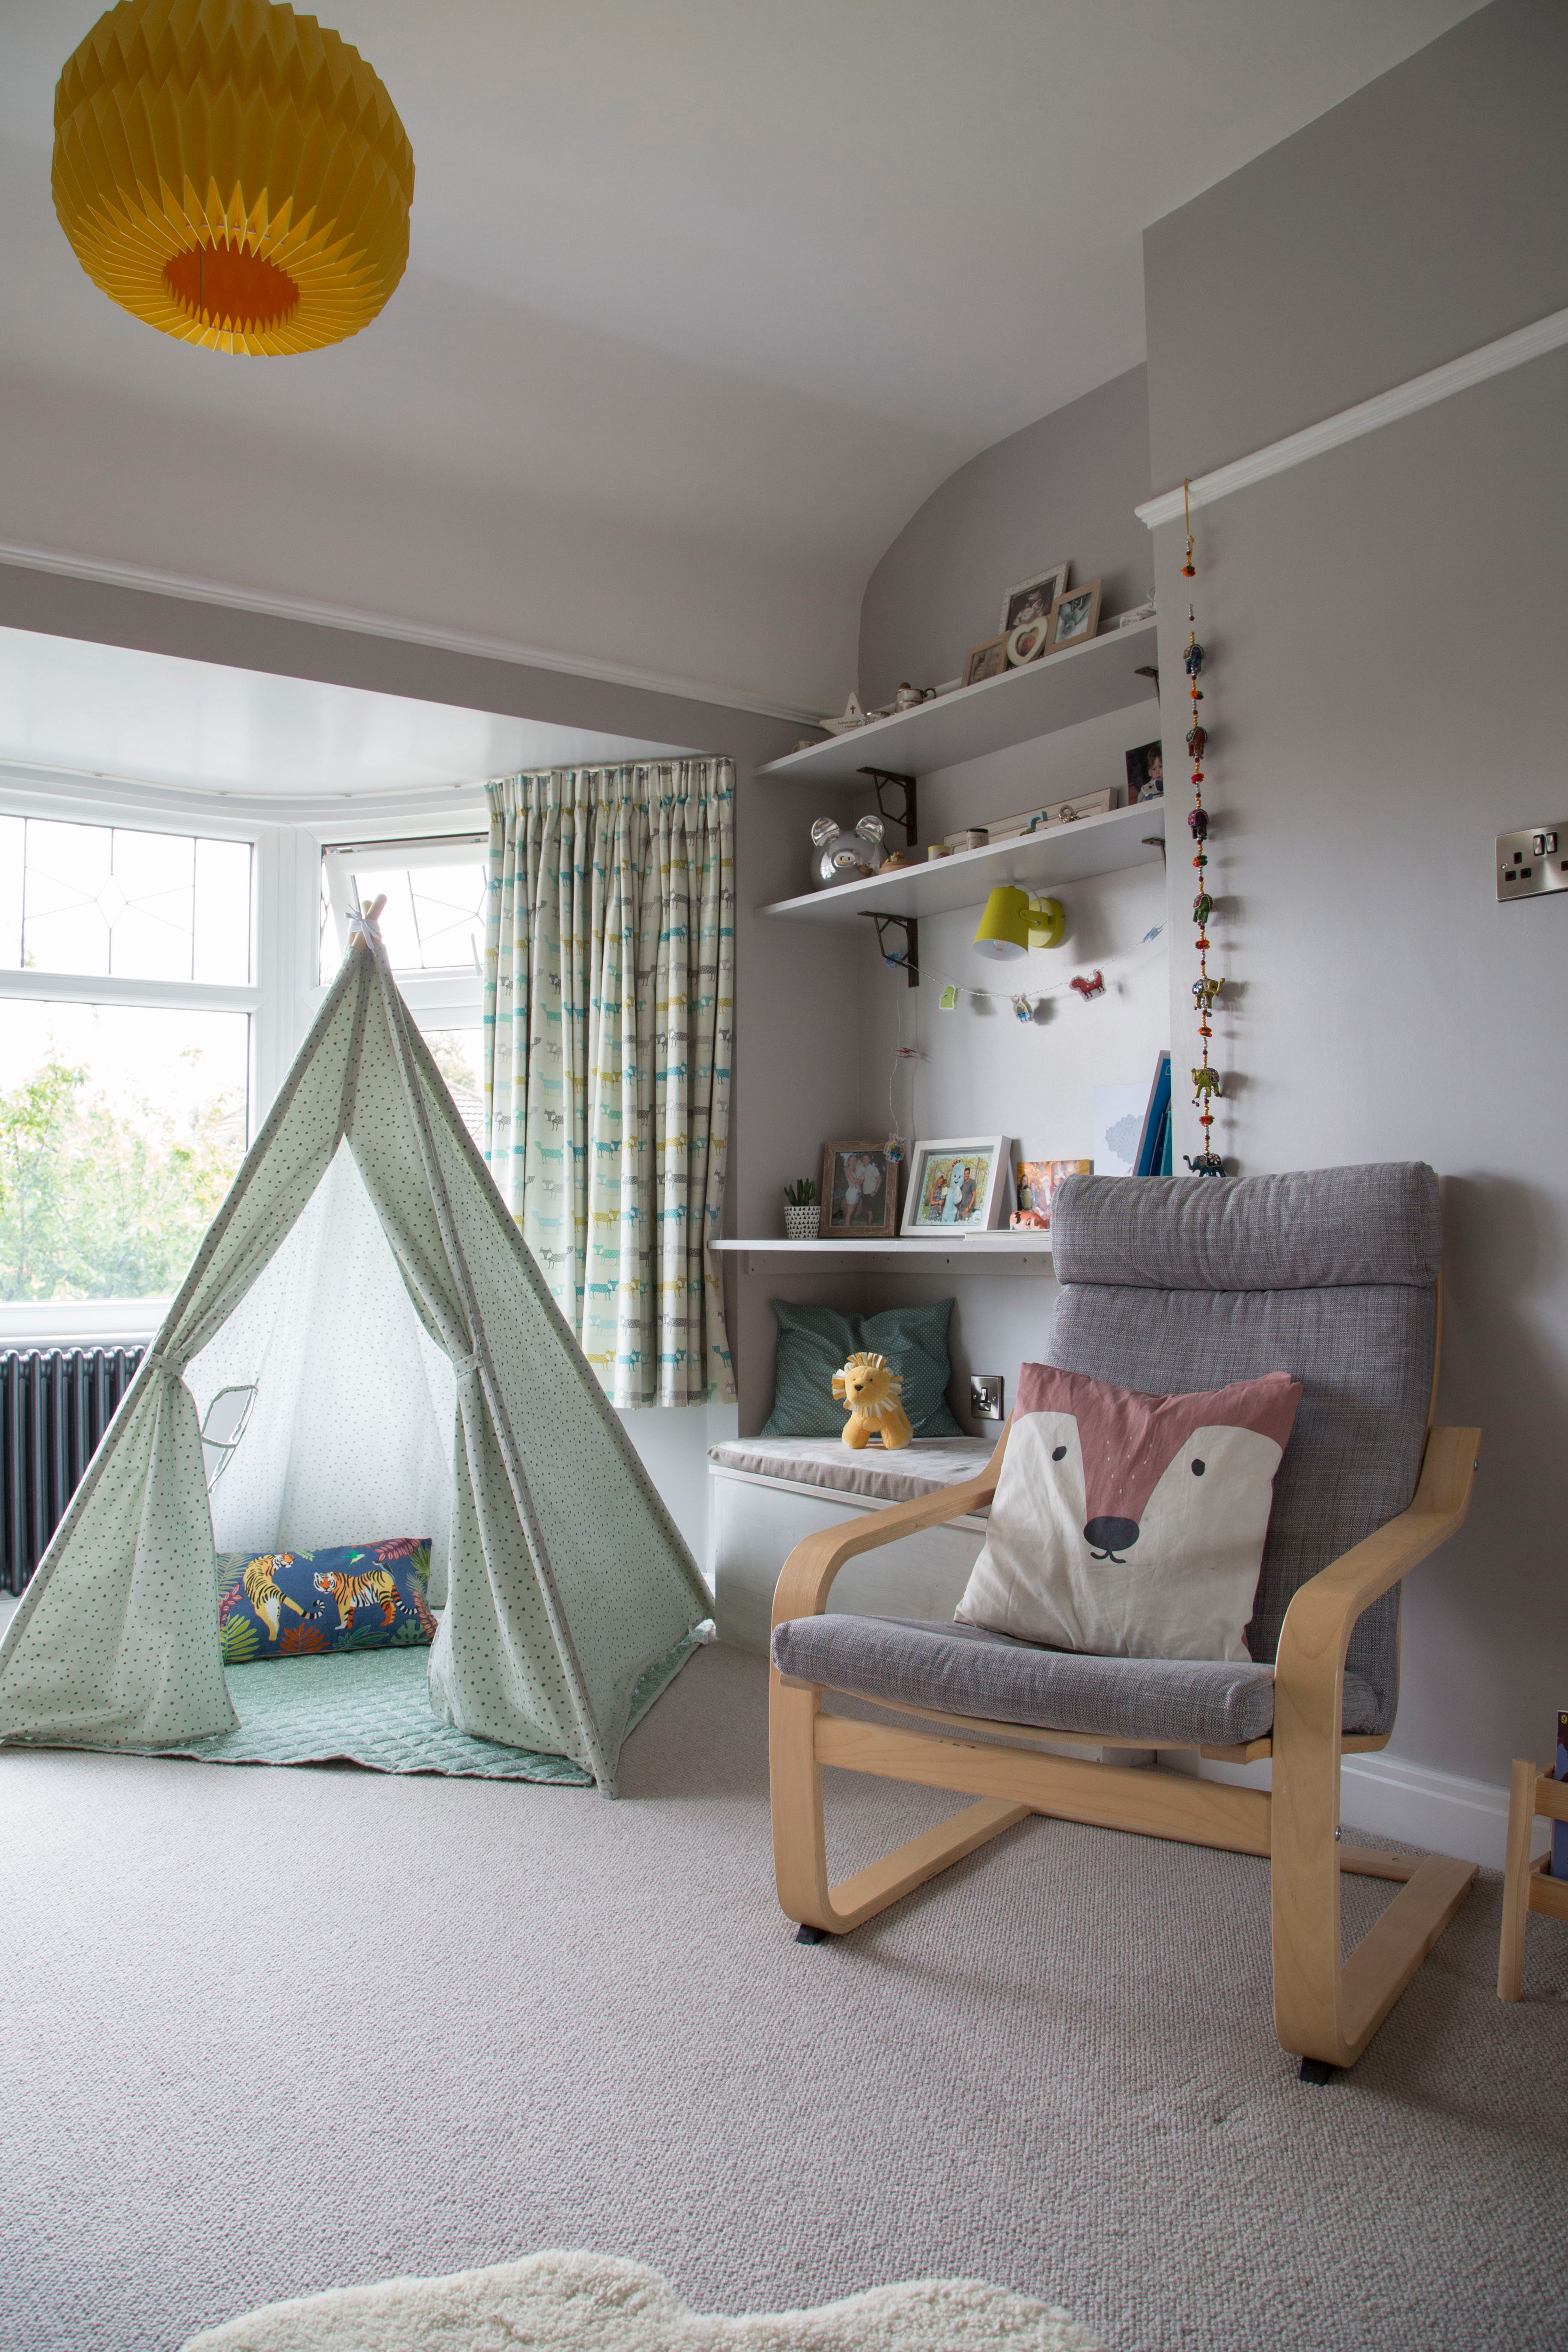 Boy's bedroom with tipi